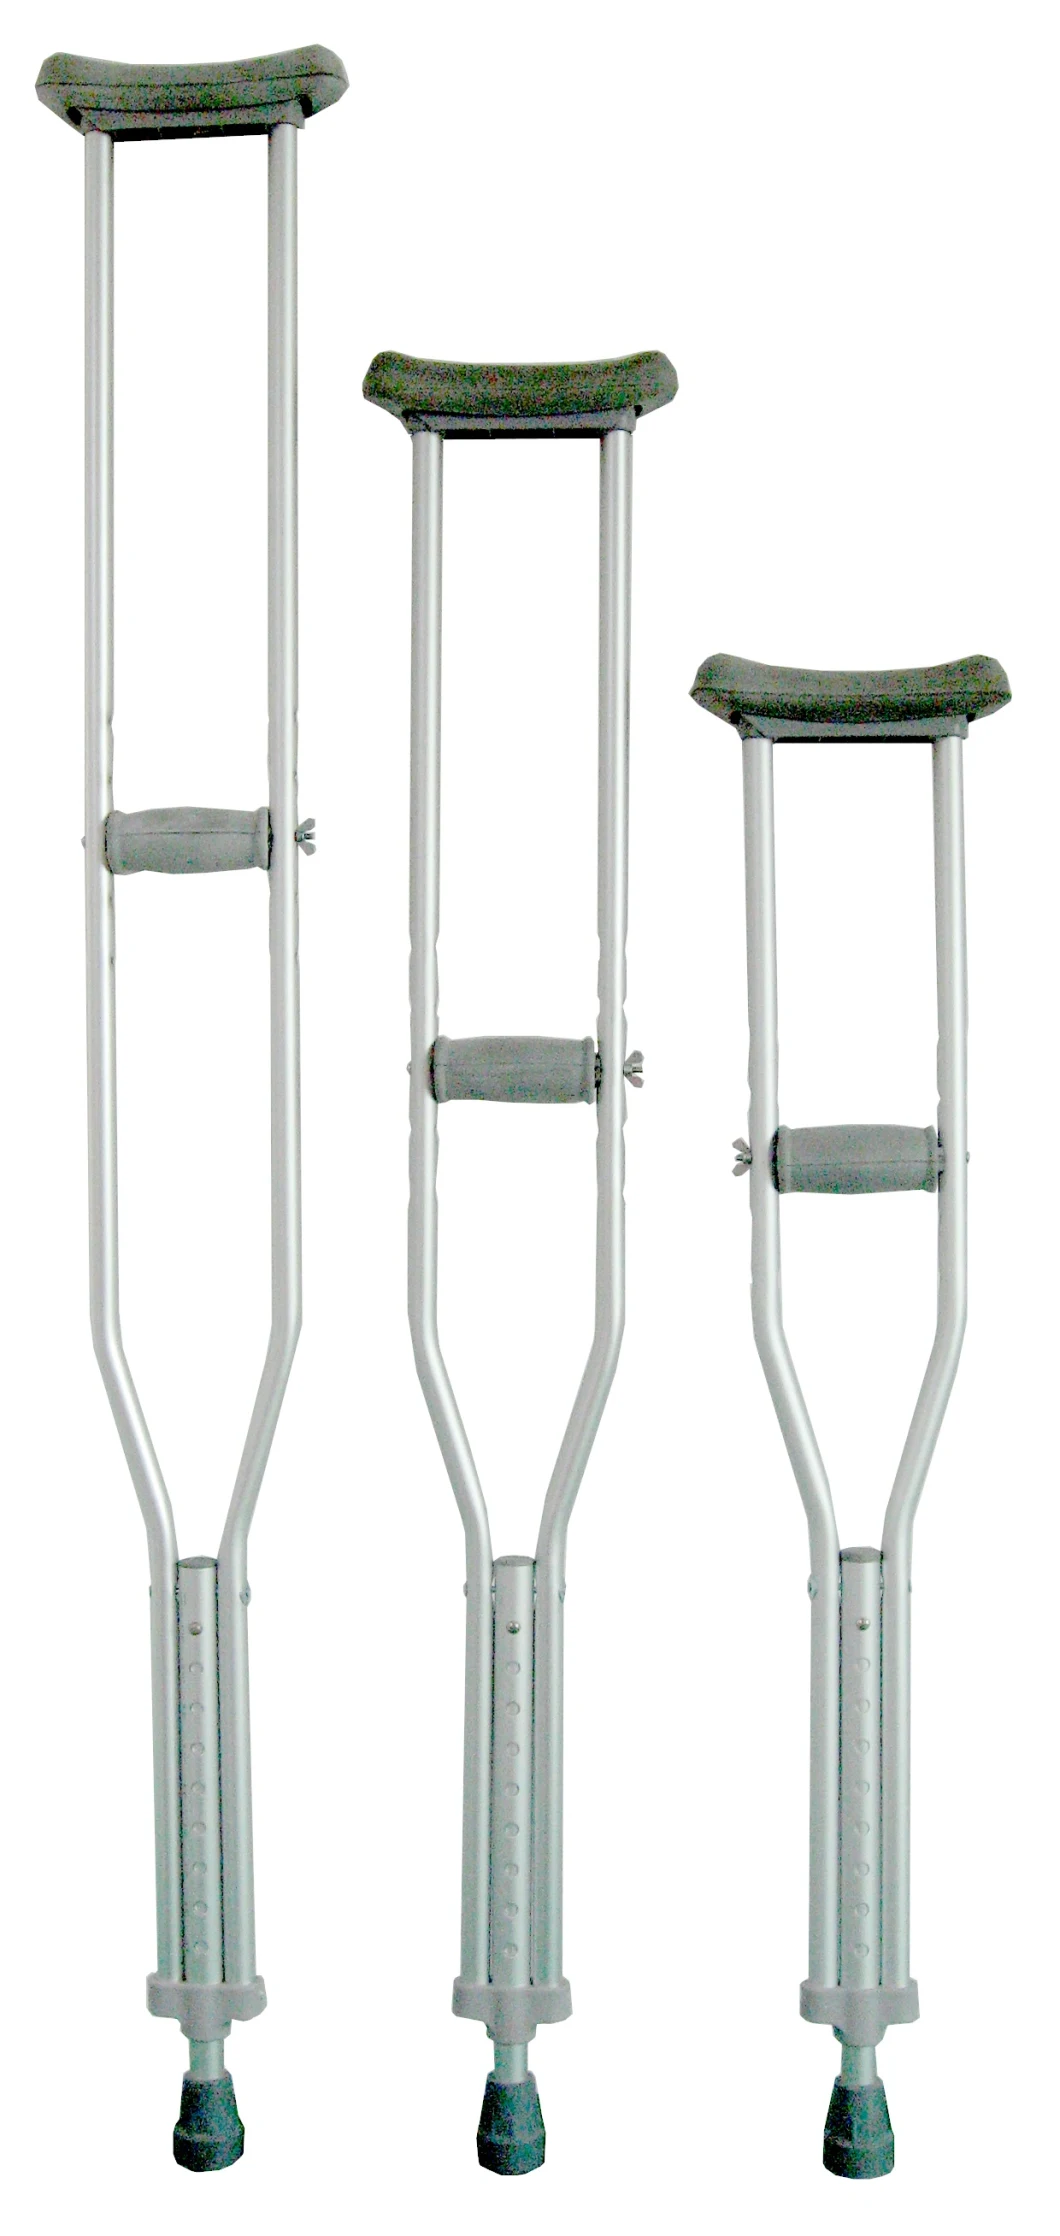 Comfortable Adjustable Elderly and Disabled Aluminum Alloy Forearm Elbow Crutches